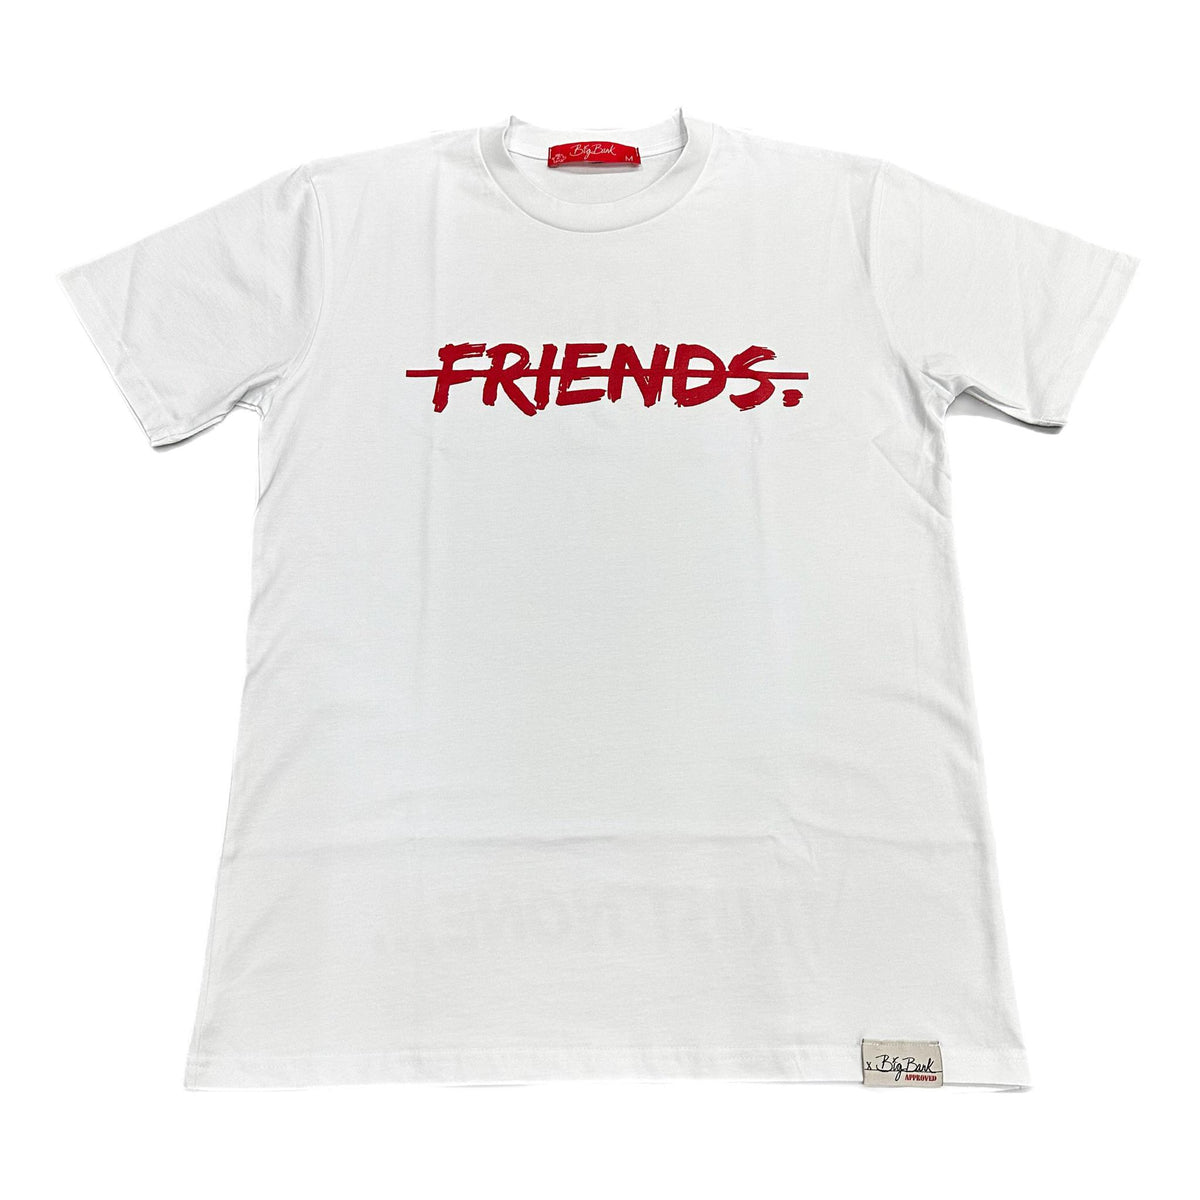 No Friends T Wt/Red